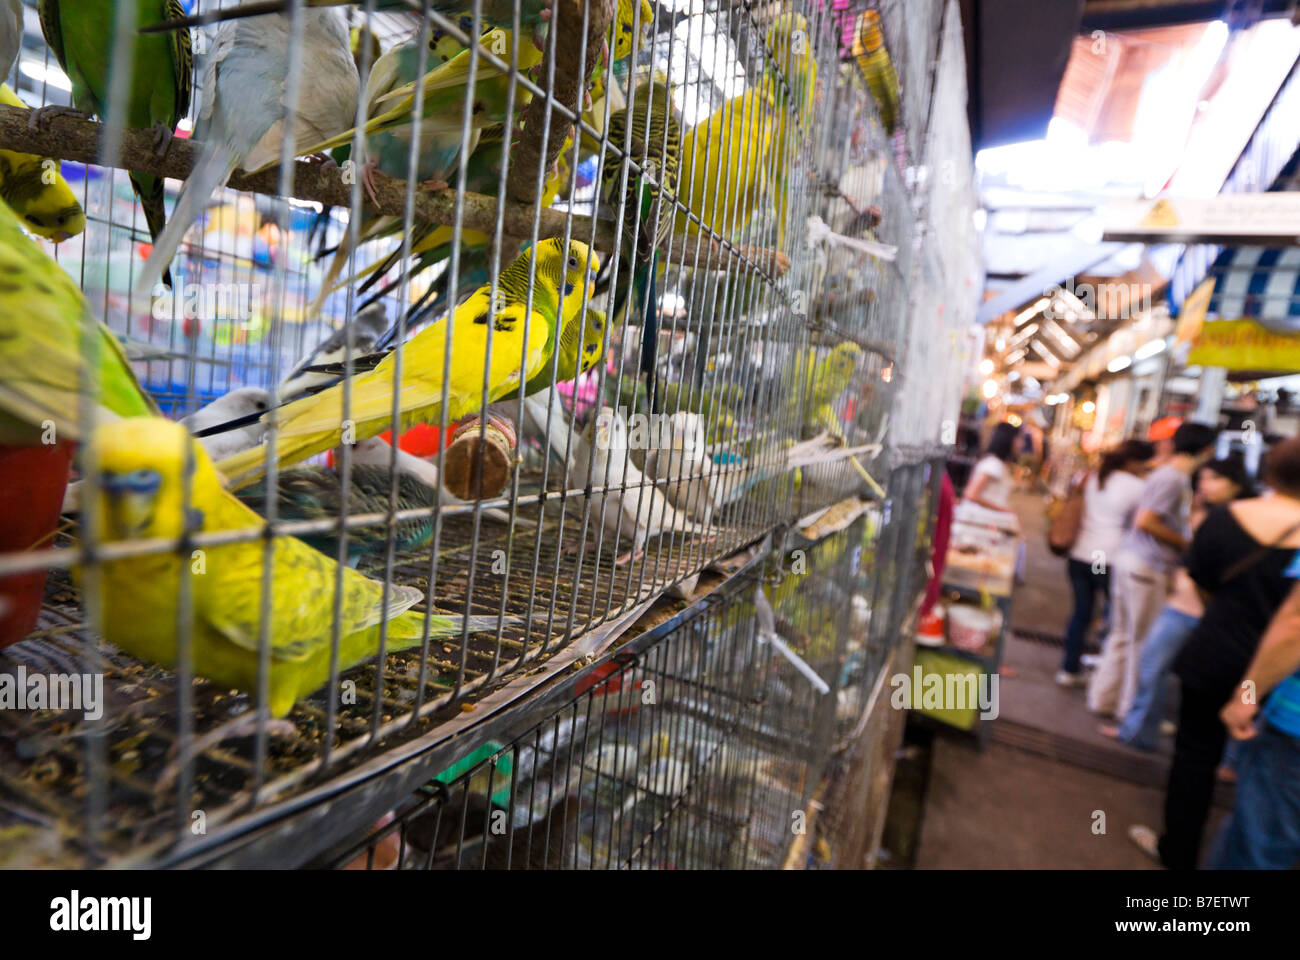 Caged birds for sale on a pet shop stall at Chatuchak Weekend Market in Bangkok Thailand Stock Photo